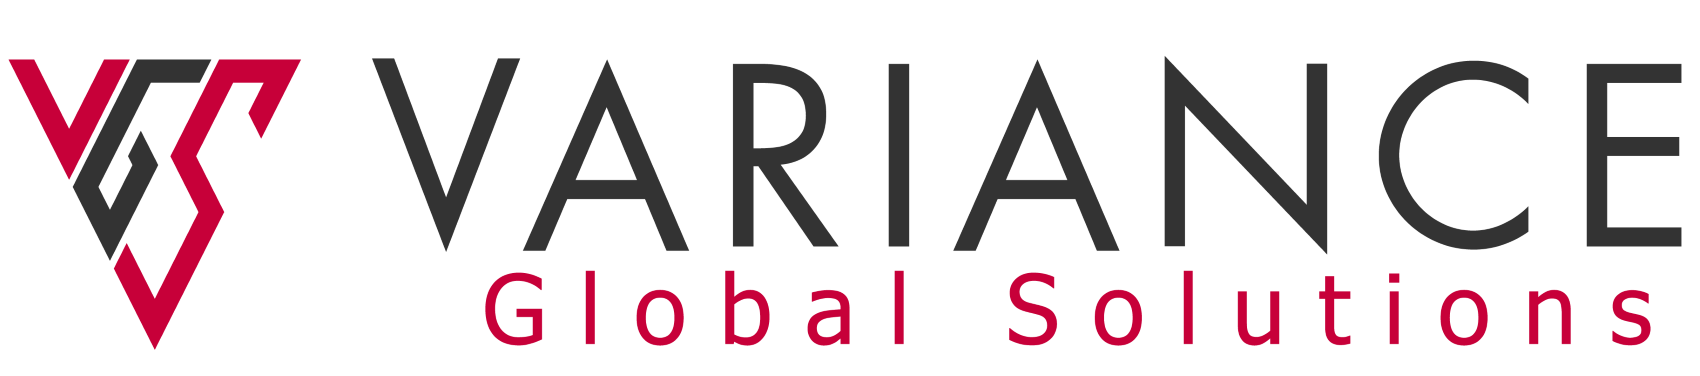 Variance Global Solutions